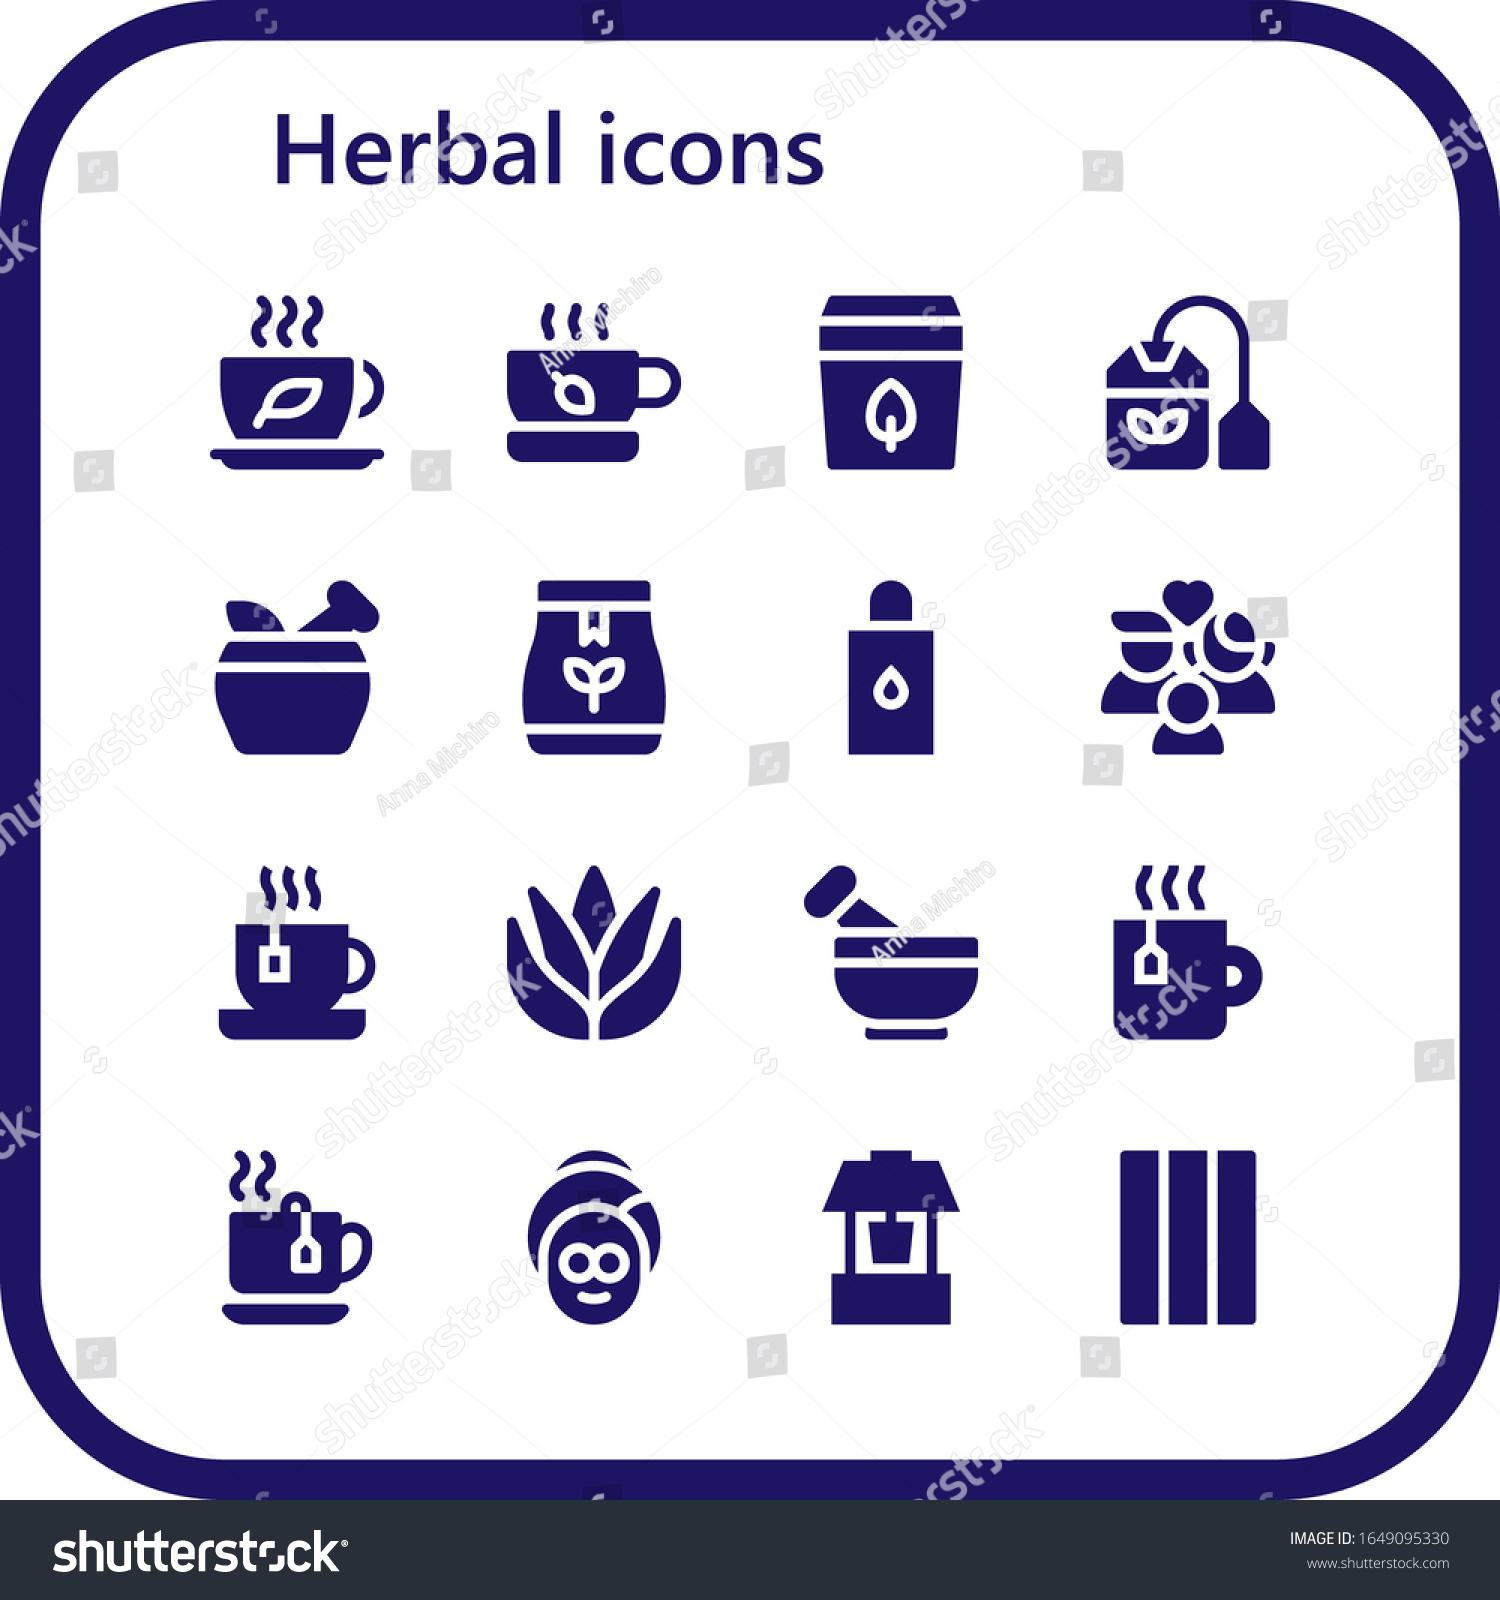 SVG of herbal icon set. 16 filled herbal icons. Included Tea, Tea bag, Mortar, Body oil, Wellness, Aloe vera, Spa, Well, Chewing gum icons svg